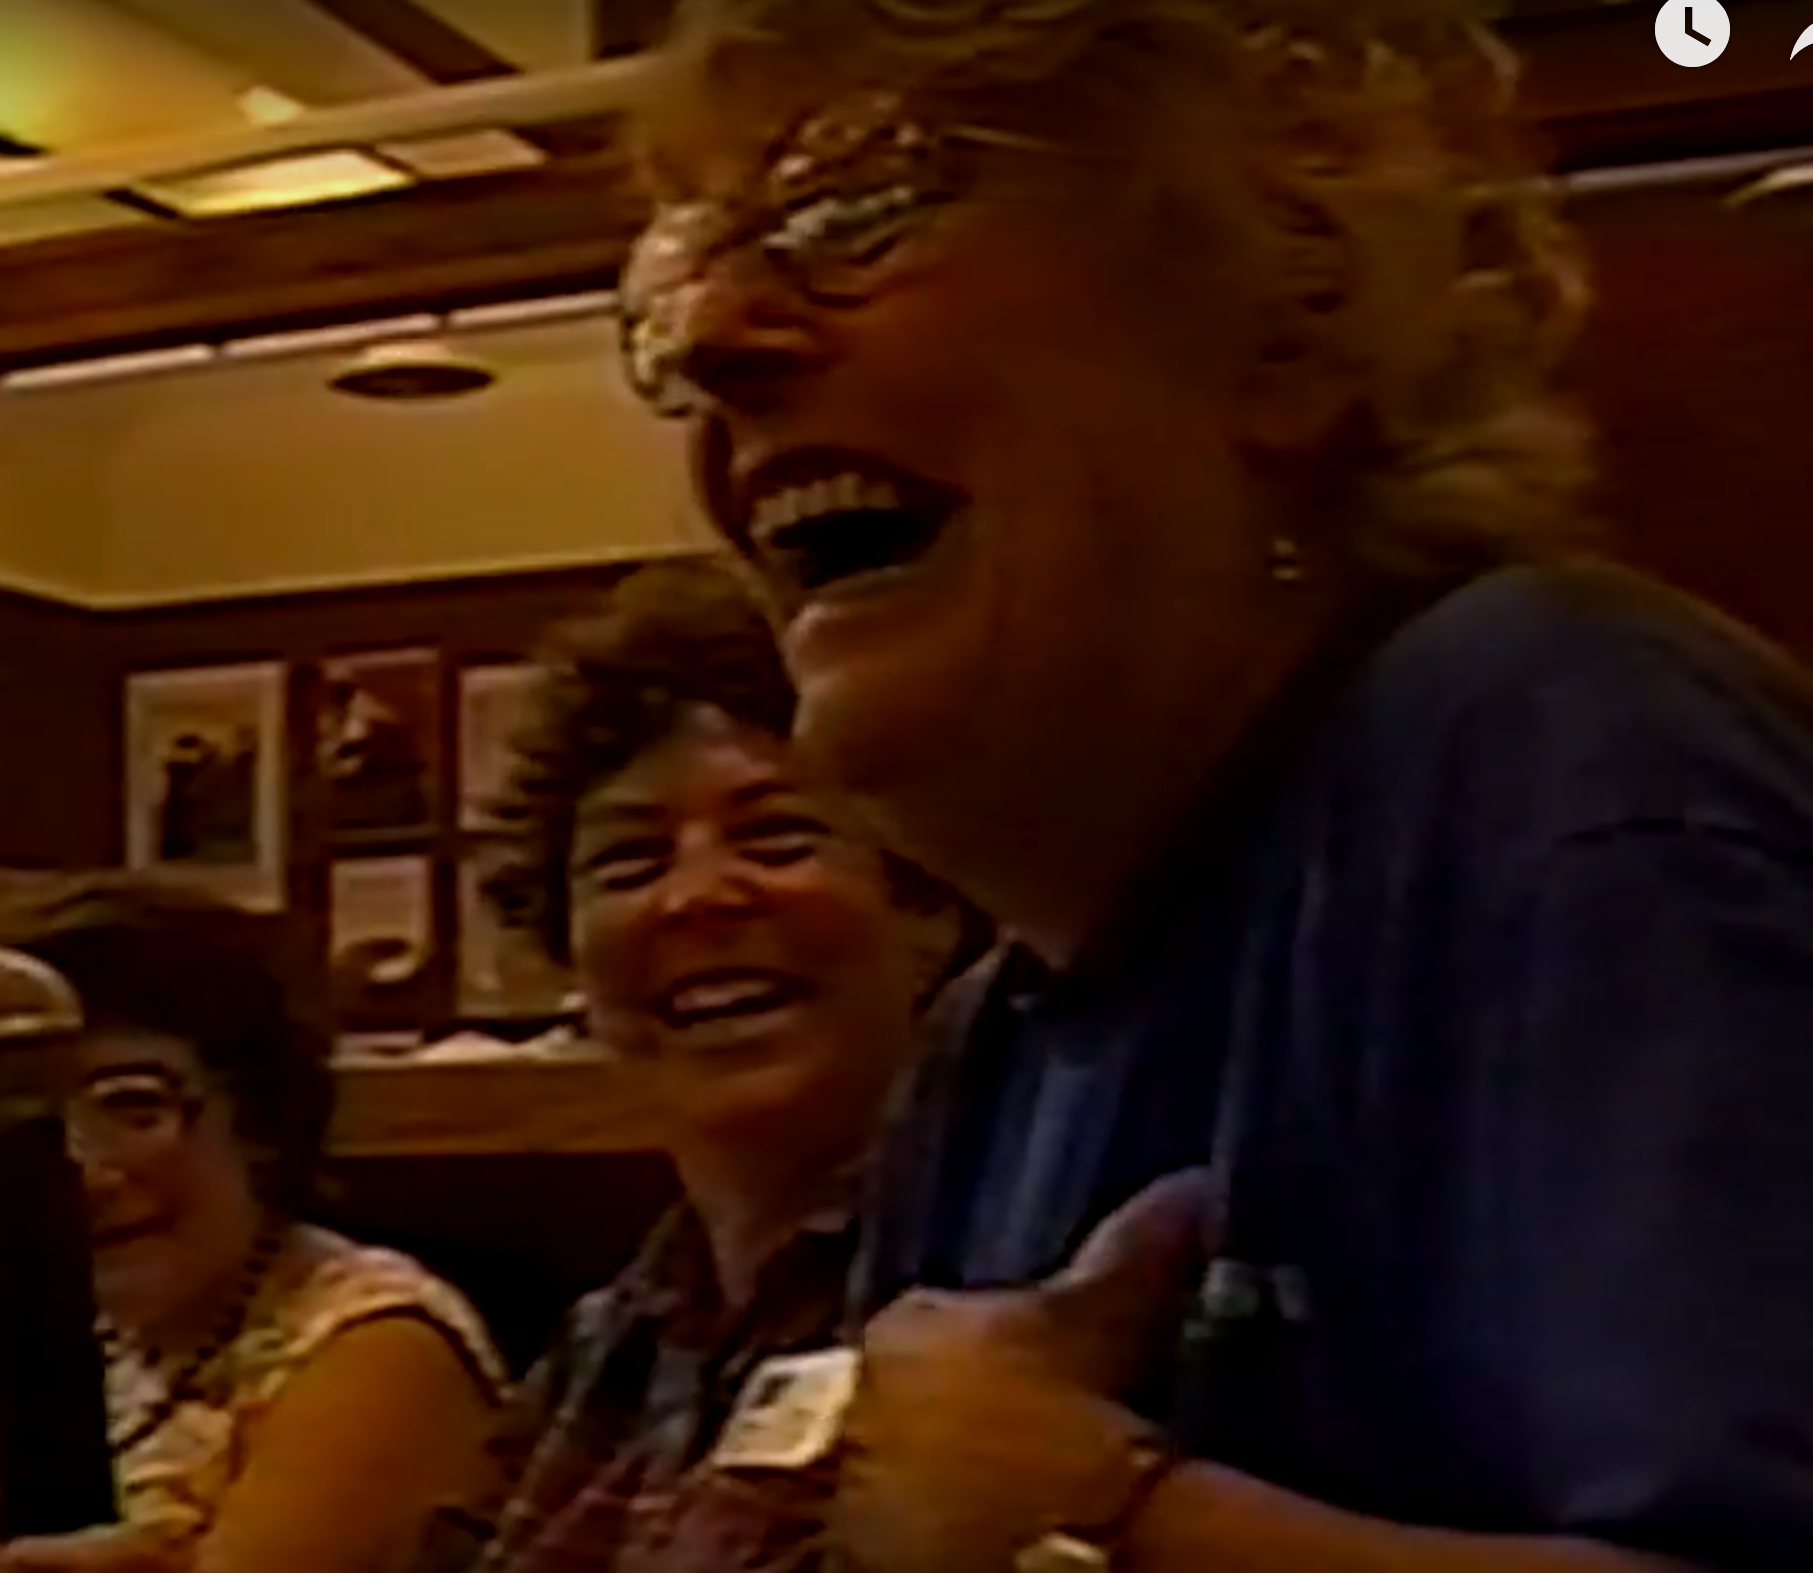 Still of Ann Hartman laughing from attached video